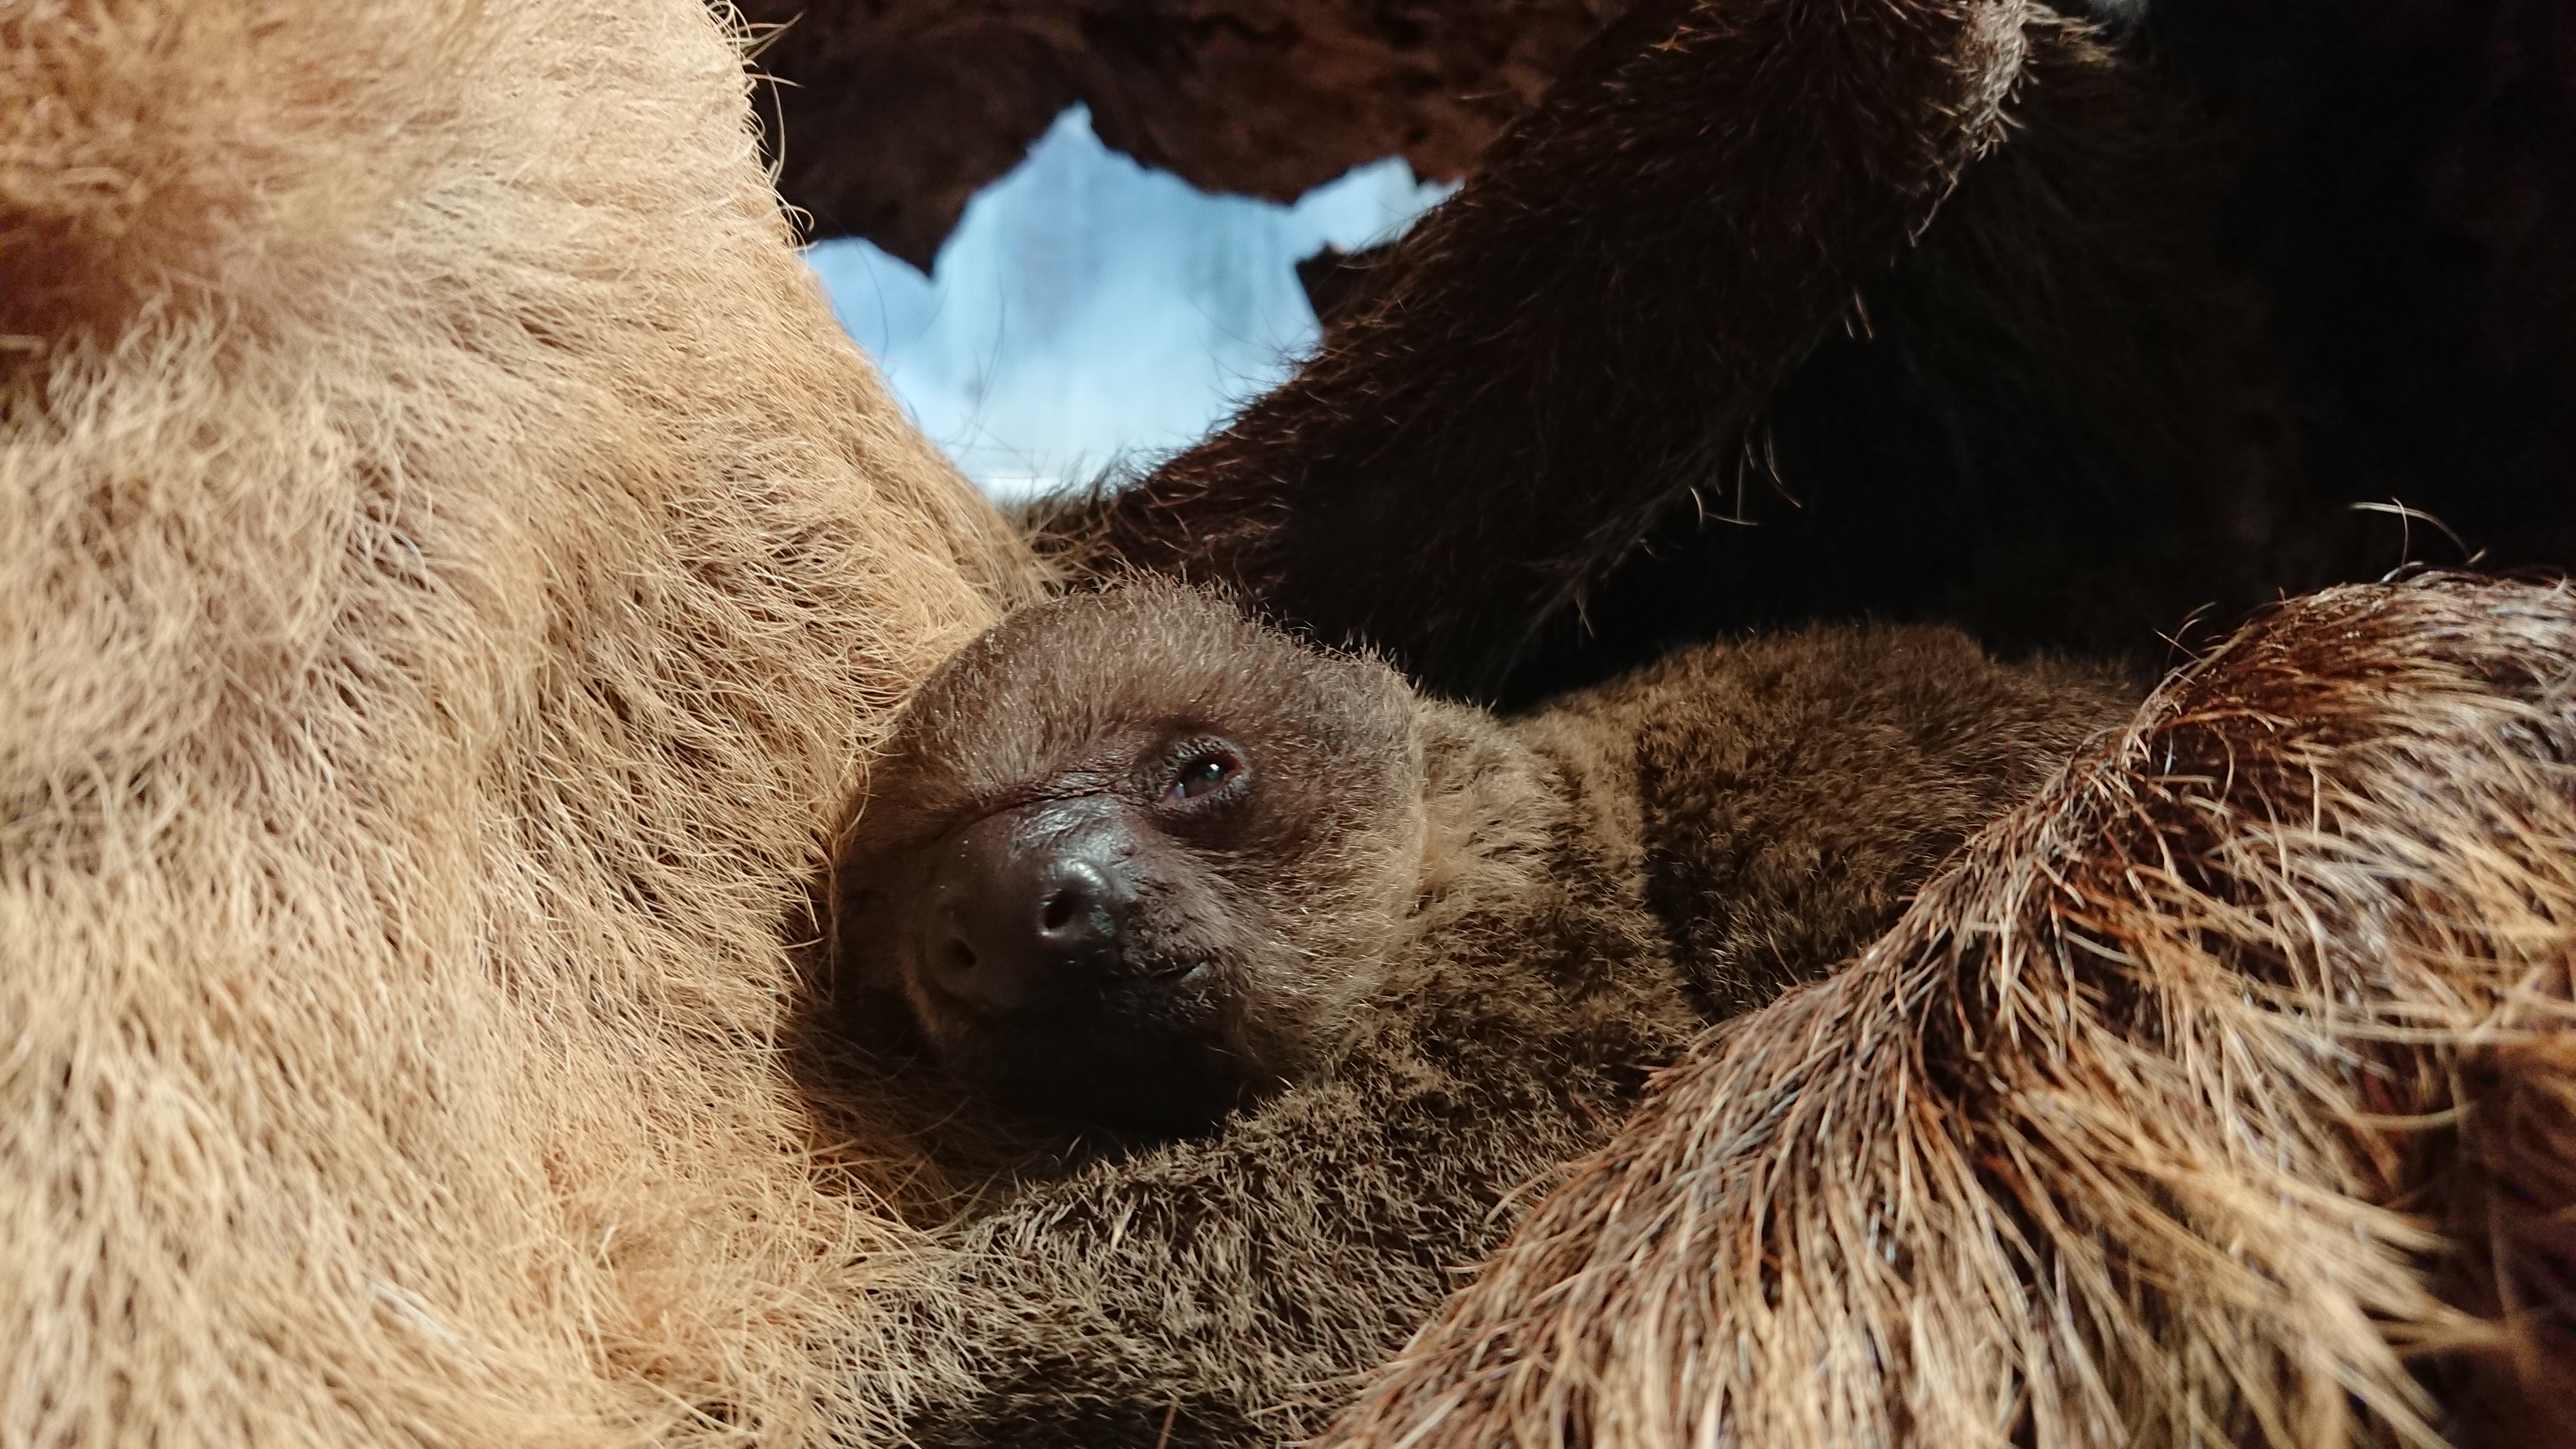 Elio the baby sloth clinging to their mother